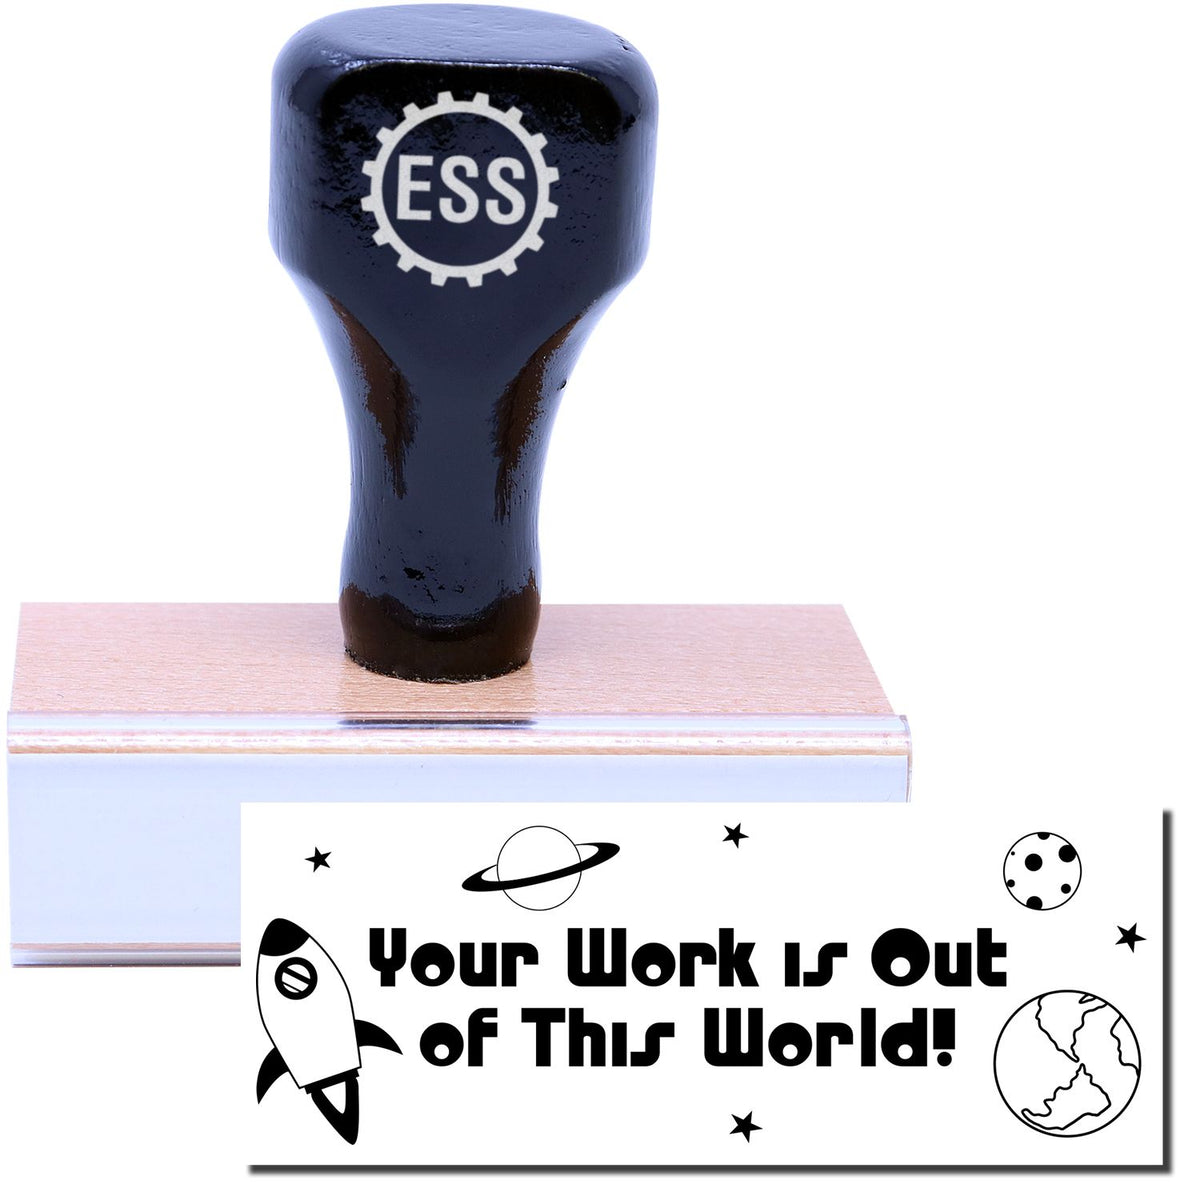 A stock office rubber stamp with a stamped image showing how the text &quot;Your Work is Out of This World!&quot; in a large unique wacky font with space icons like planets, moons, and a rocket ship surrounding the text is displayed after stamping.